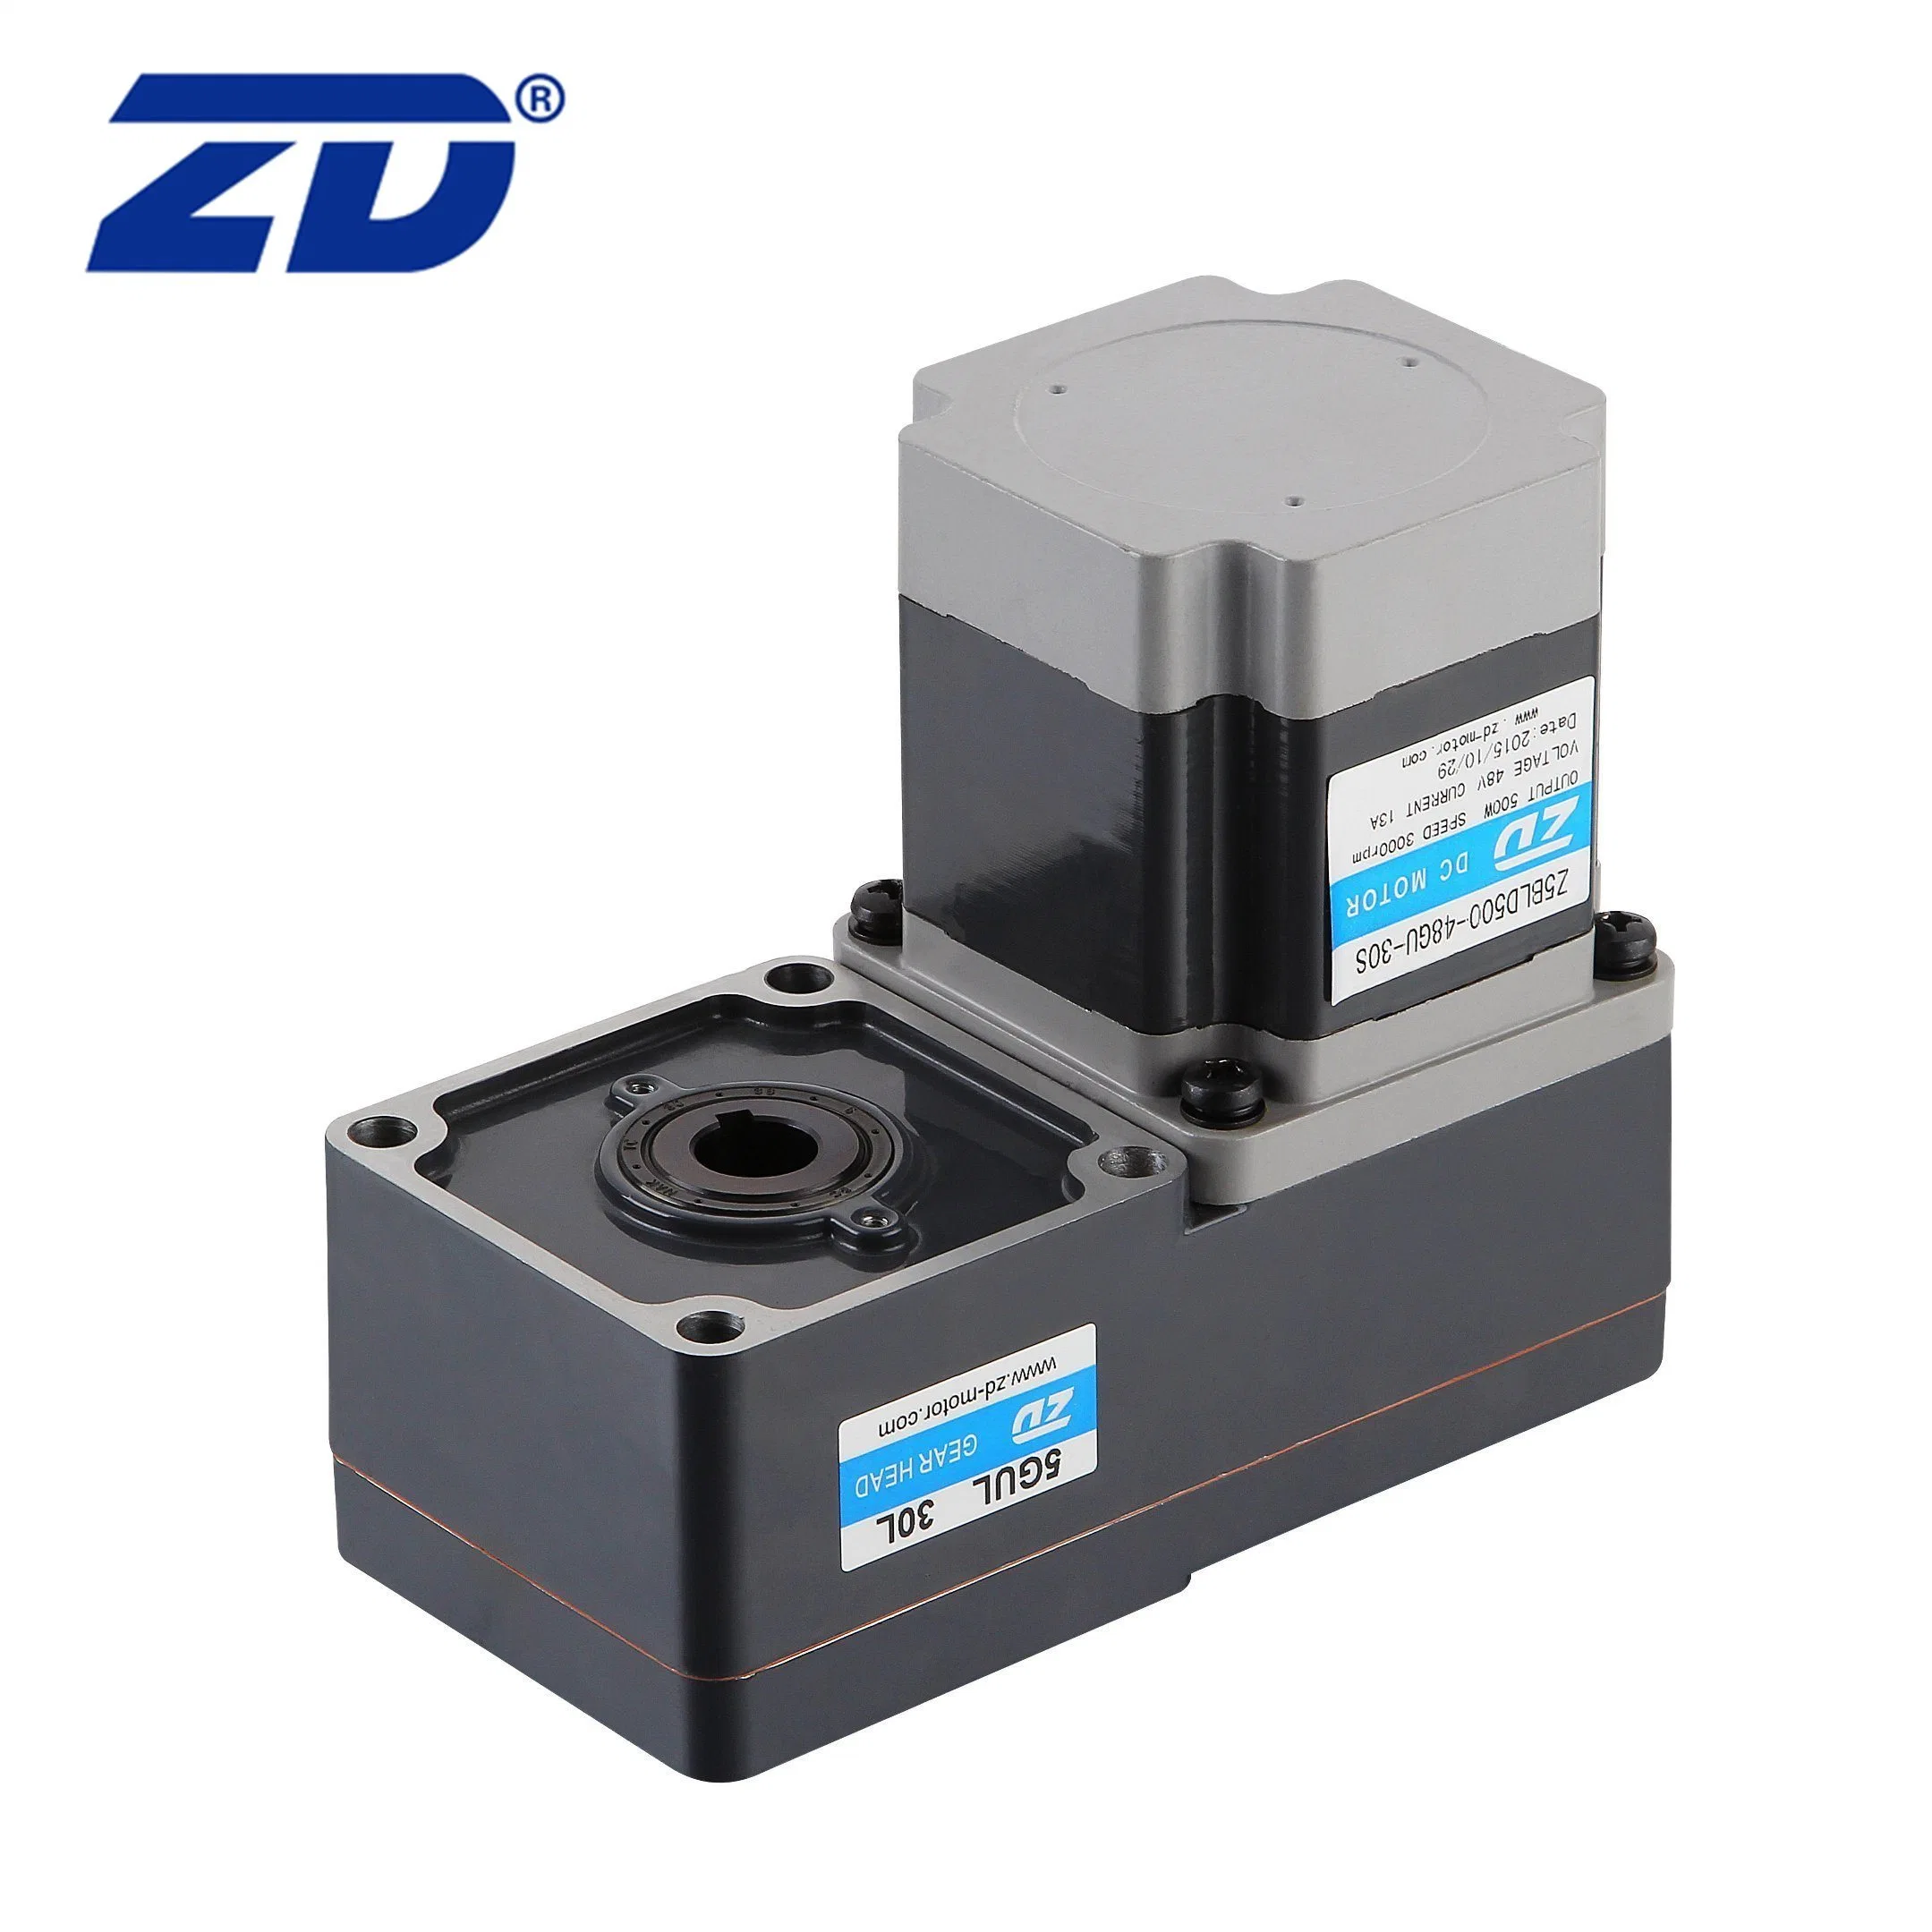 ZD Low Voltage Brushless Motor Controller Electric Brushless DC Gear Motor With Speed Controller